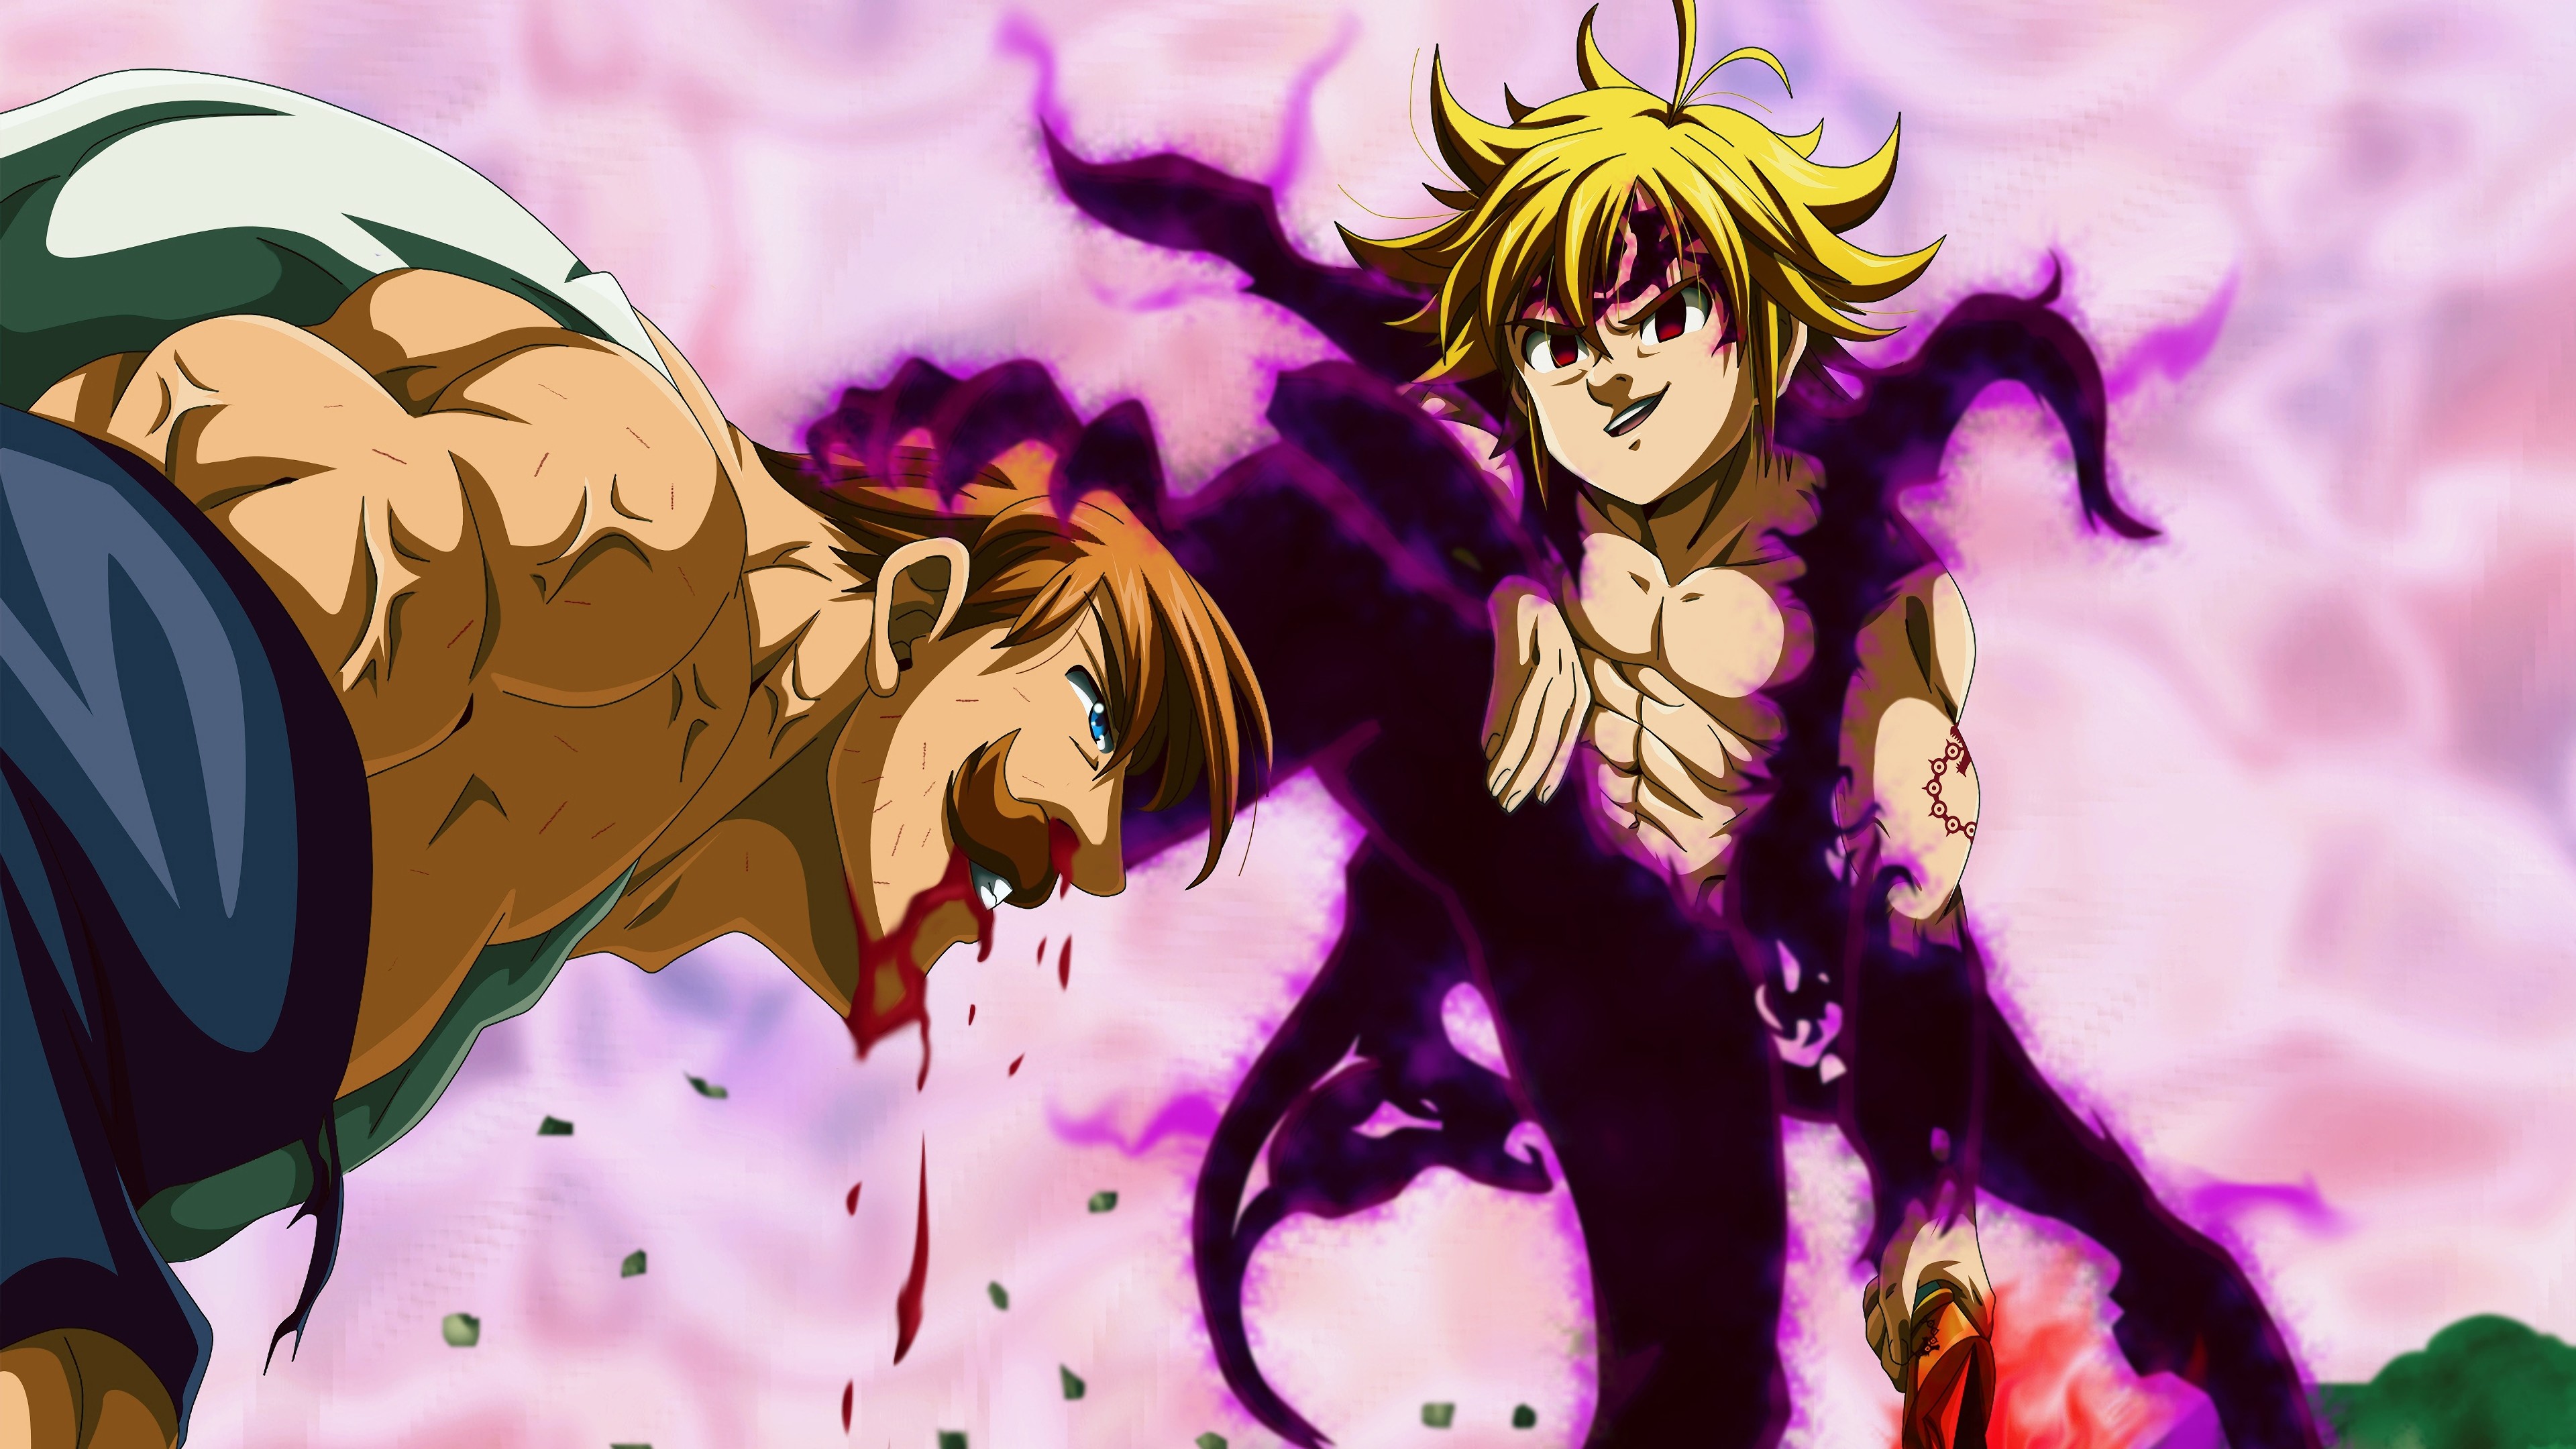 Seven Deadly Sins Wallpapers - Top Seven Deadly Sins Backgrounds